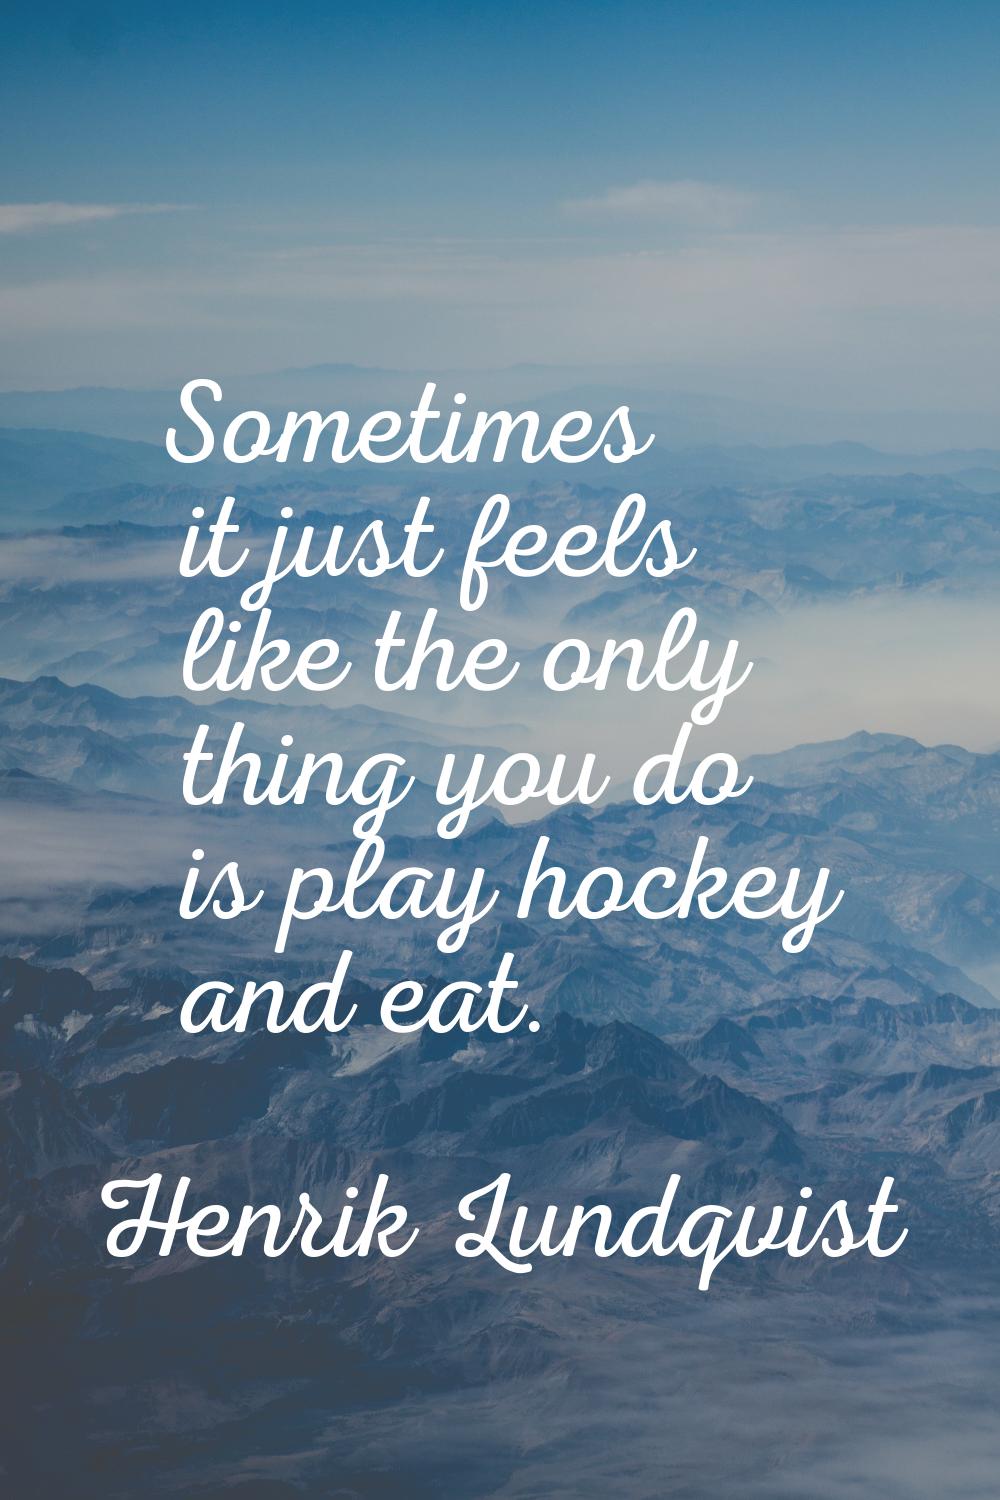 Sometimes it just feels like the only thing you do is play hockey and eat.